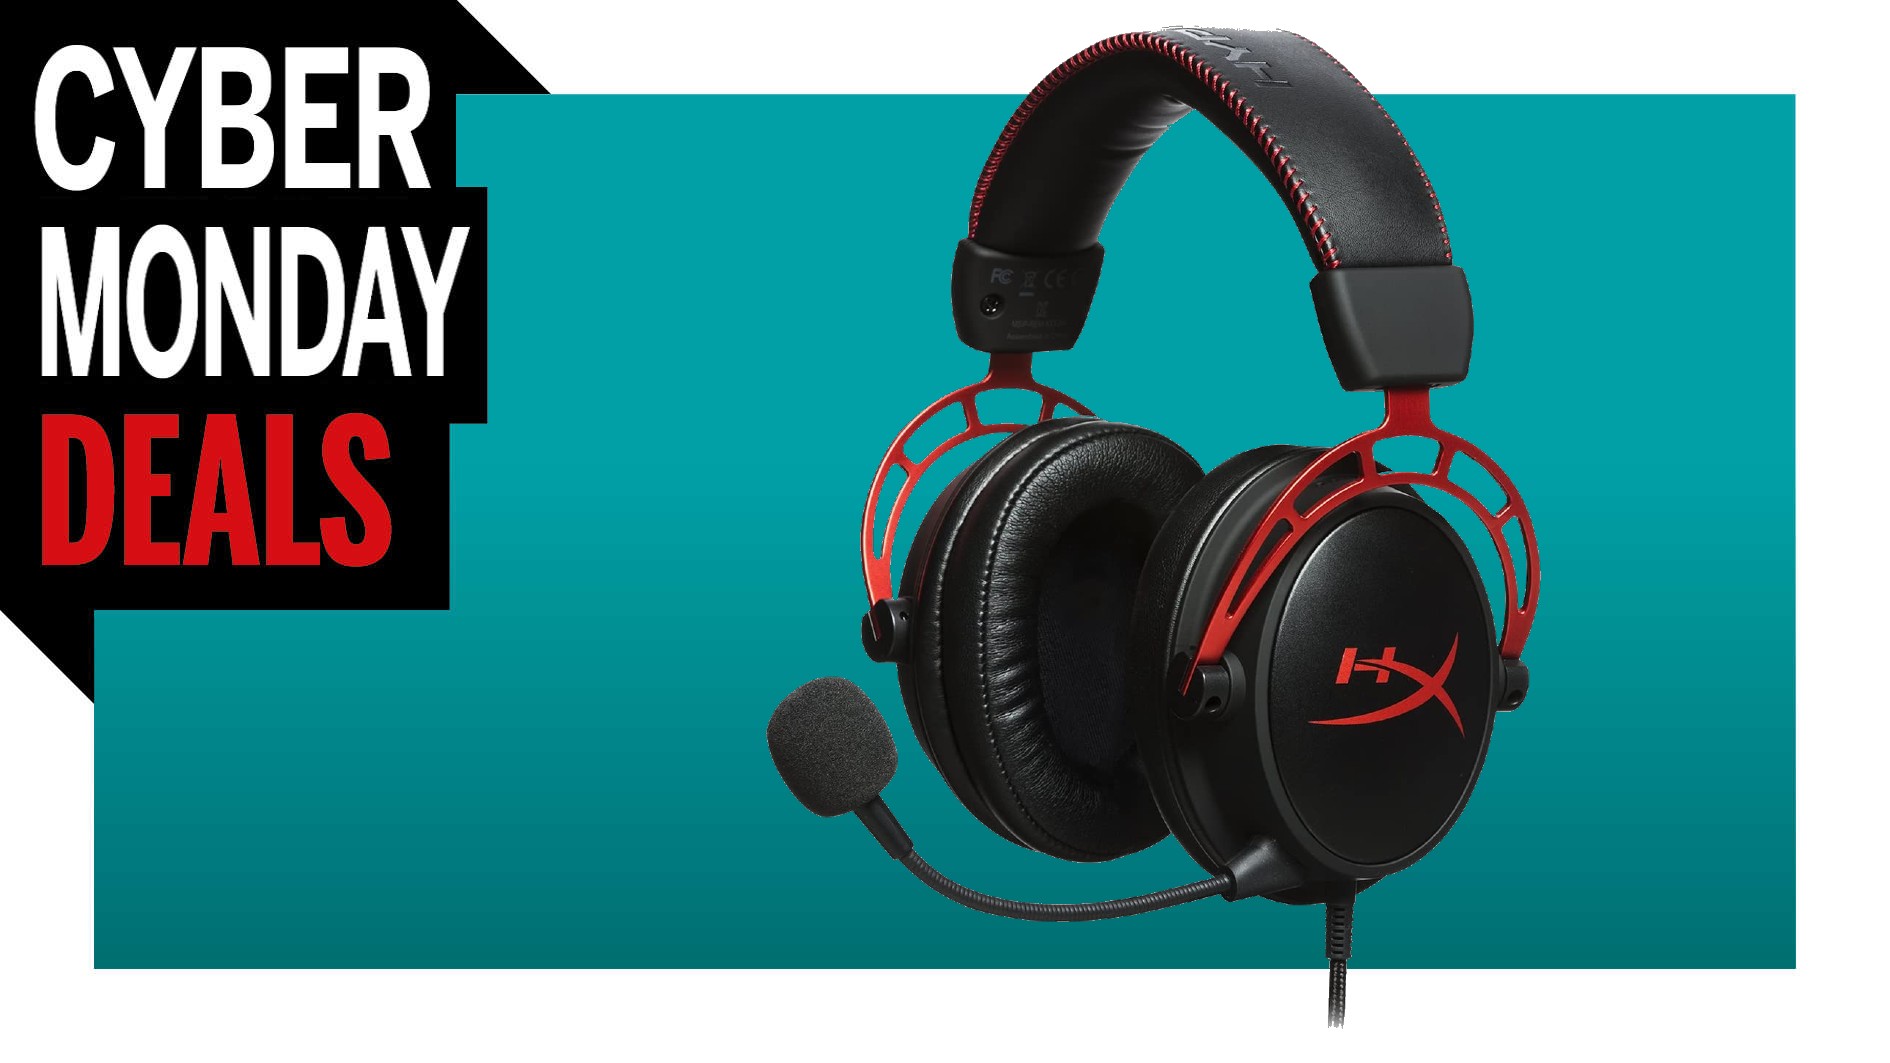  This gaming headset is a great deal anyway, even without the extra $5 off 